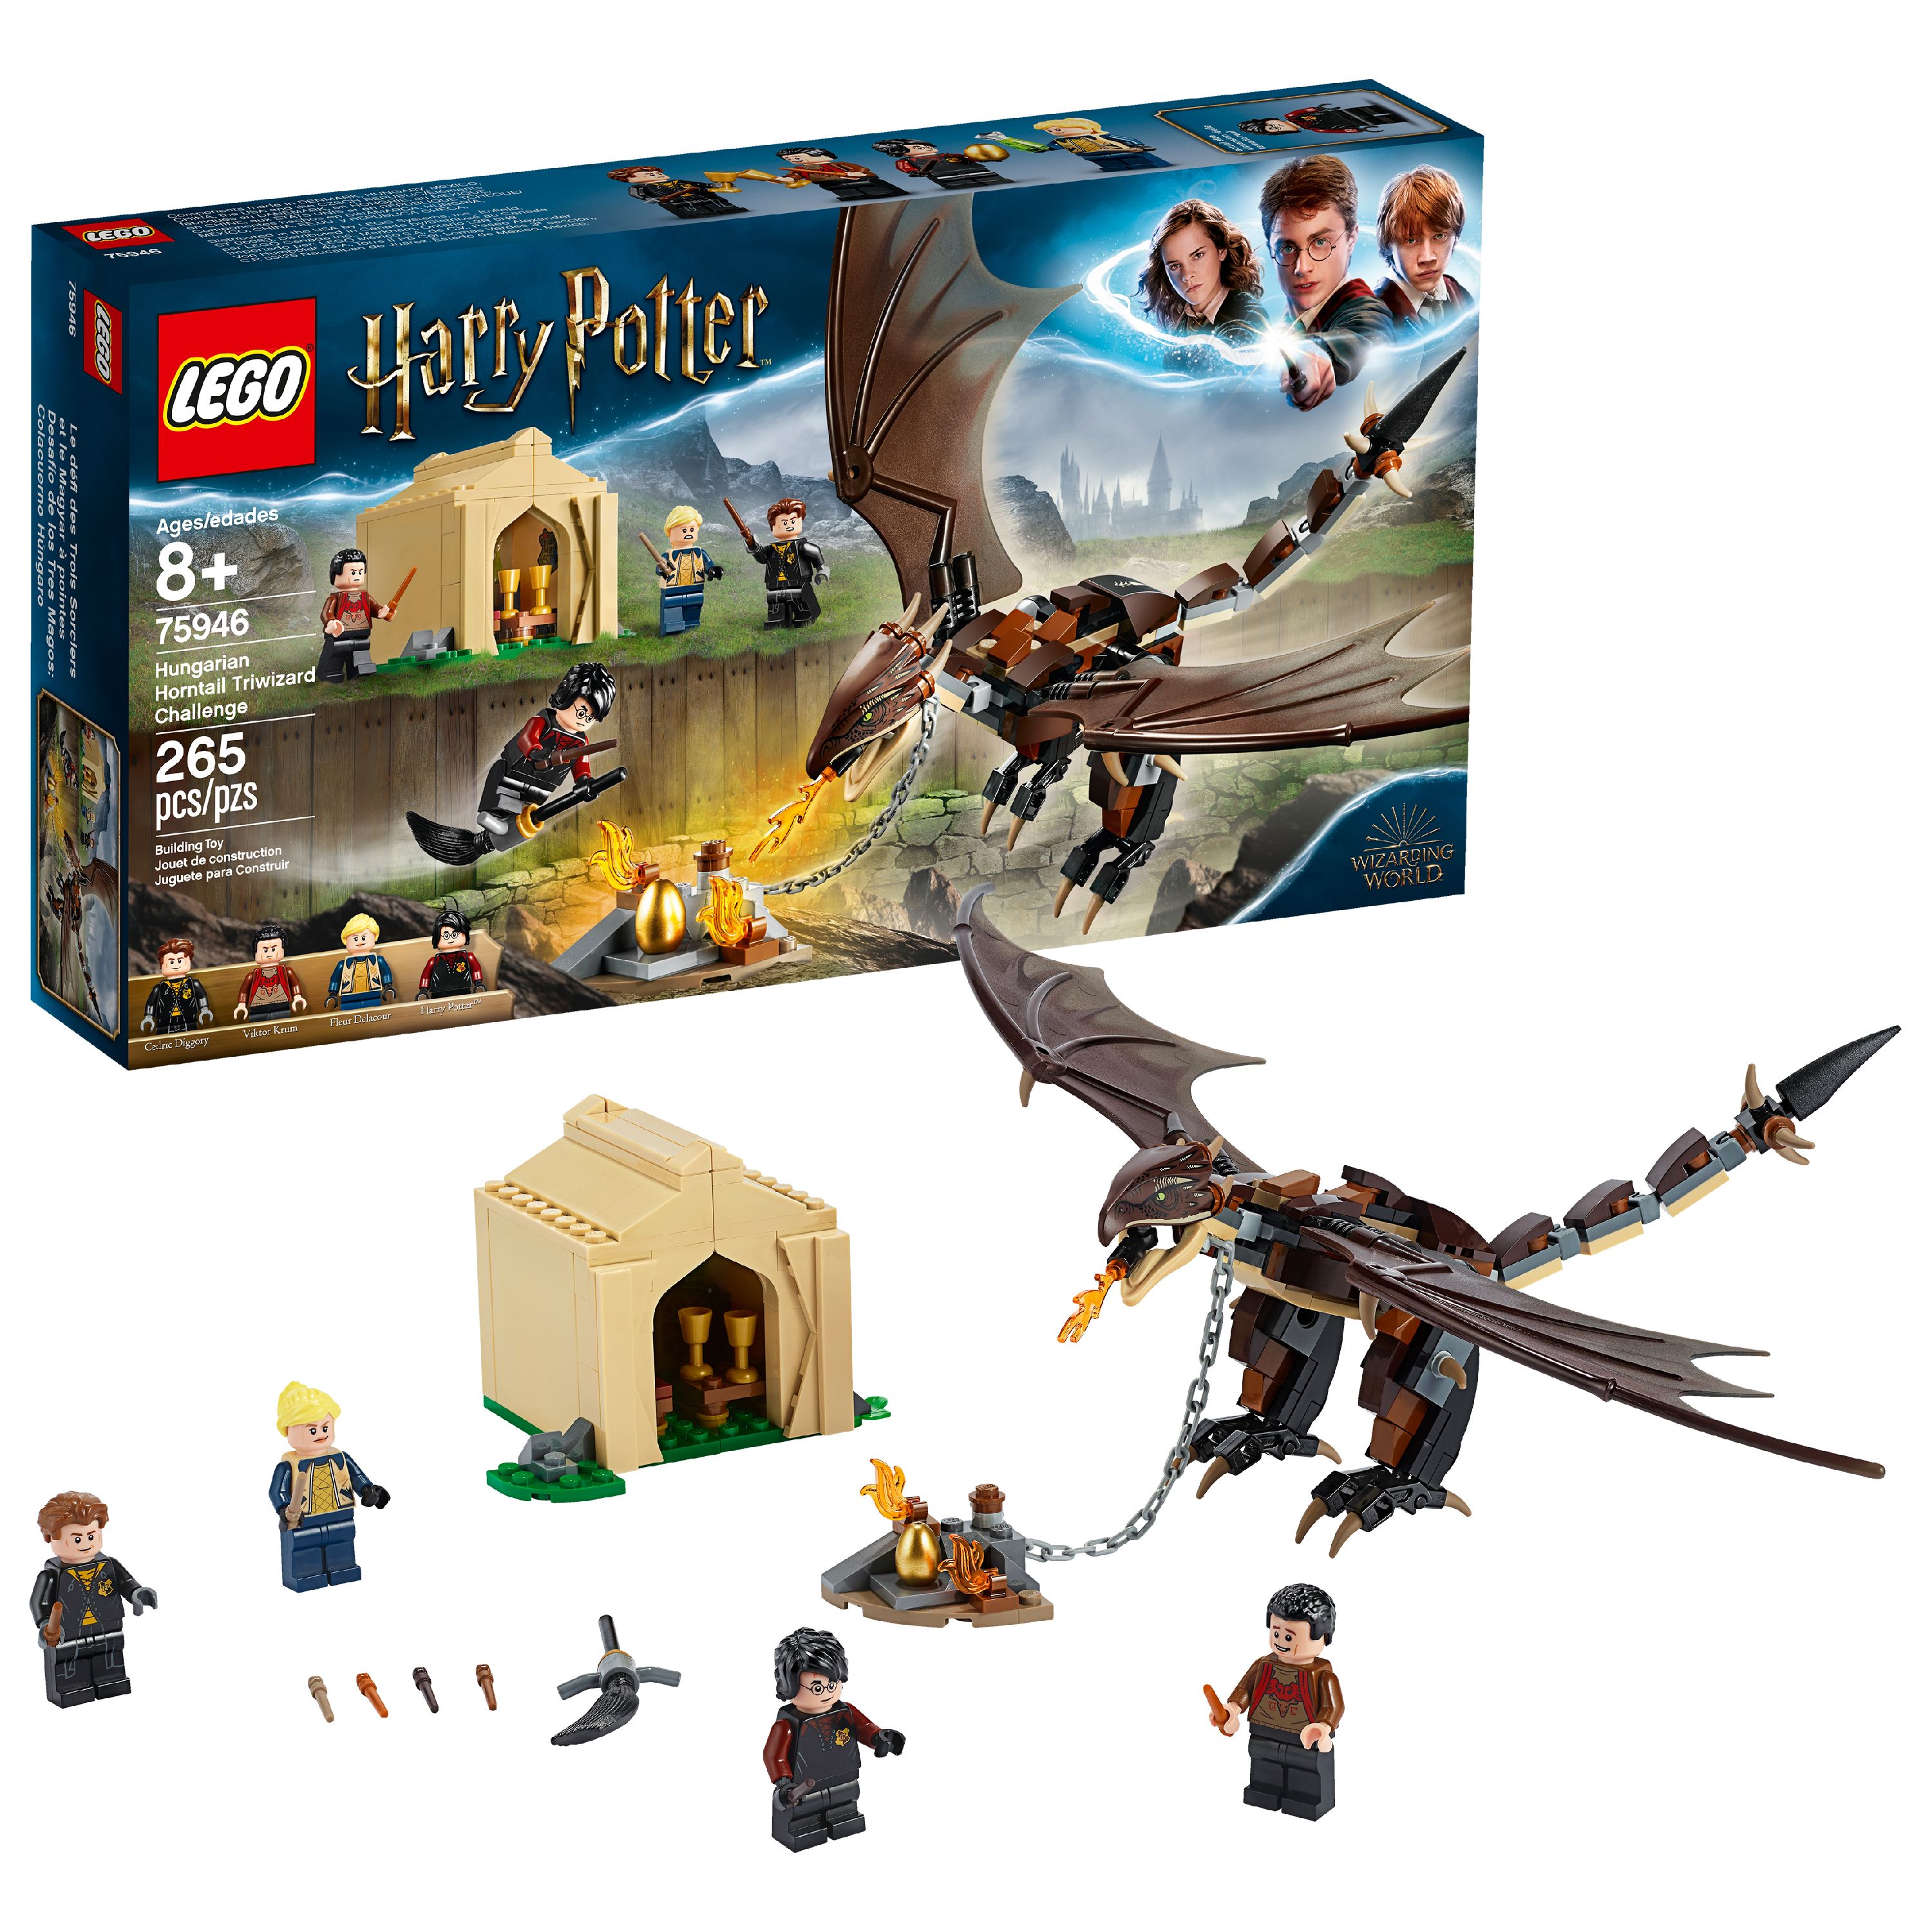 LEGO Harry Potter Hungarian Horntail Triwizard Challenge 75946 (265 Pieces) - image 1 of 8